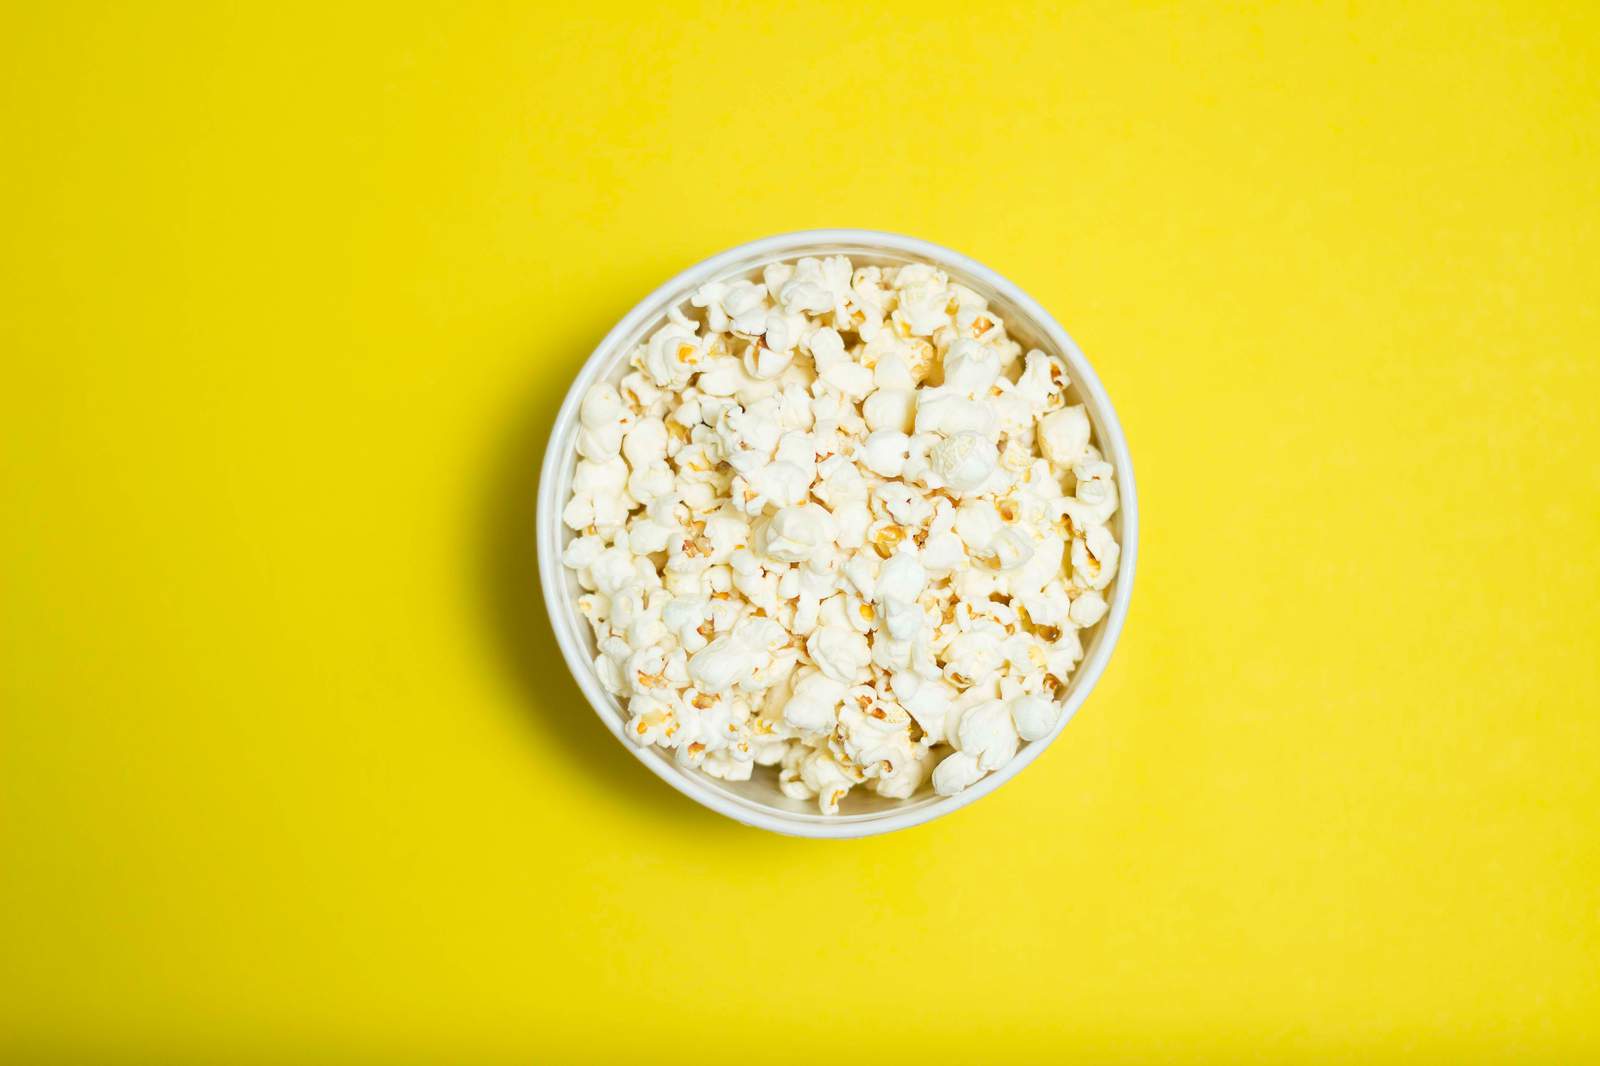 A Food Network host made creamy popcorn salad and the internet would like a word